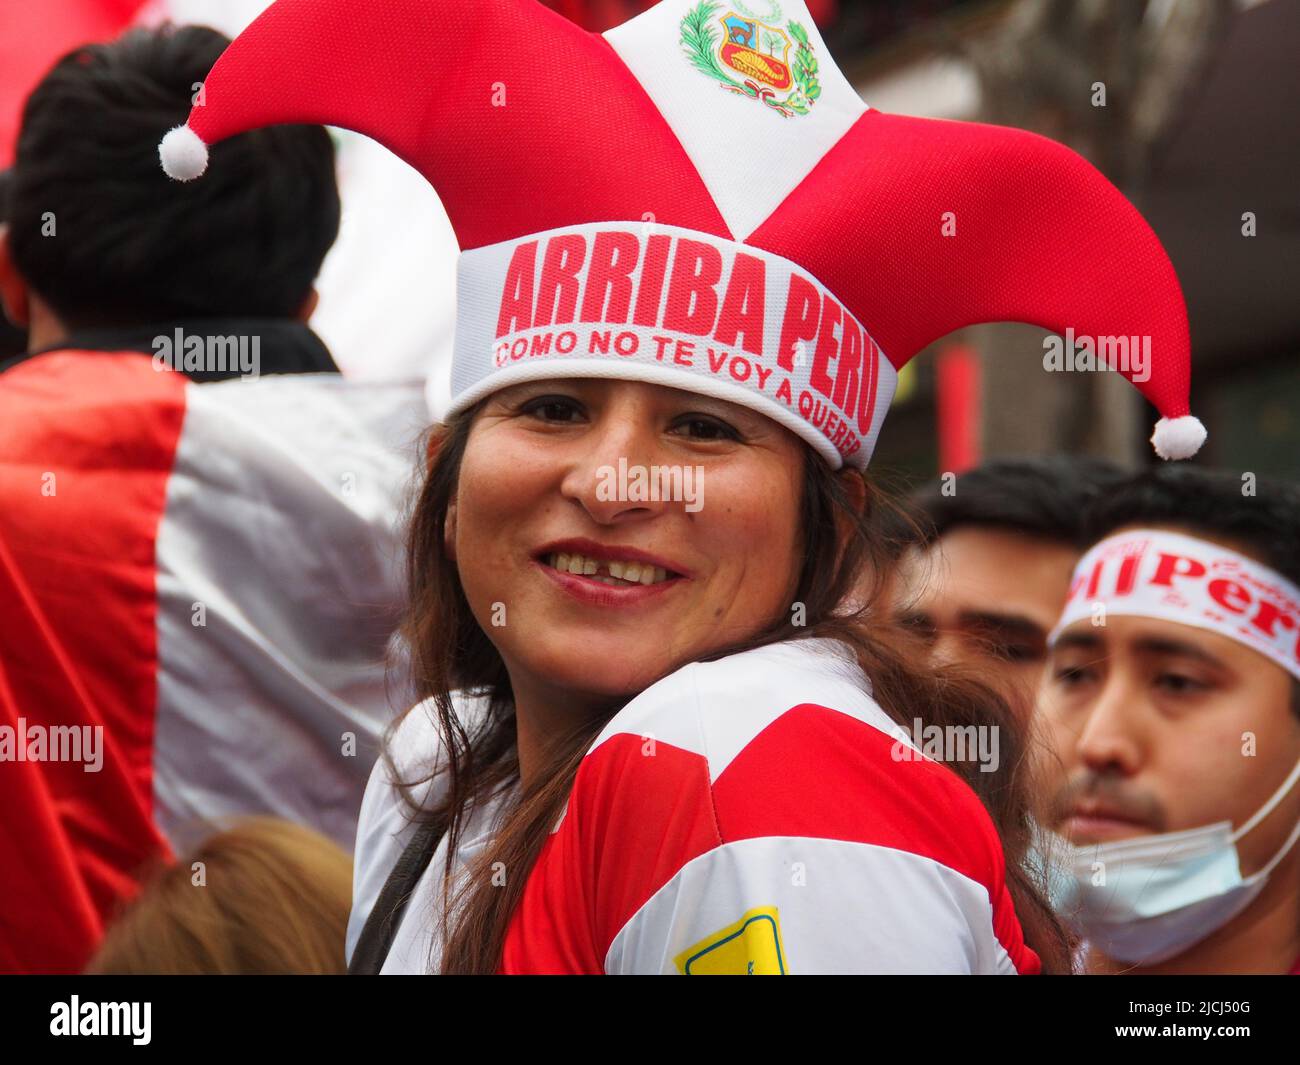 A woman wearing the colors of the Peruvian national team when fans of the Peruvian Football team watching the Qatar 2022 FIFA World Cup Peru vs. Australia match in a giant TV screen installed at the street in Miraflores district. Peru plays against Australia in a playoff match to get a place in Qatar Football World Championship 2022. Australia won the match on penalties Stock Photo